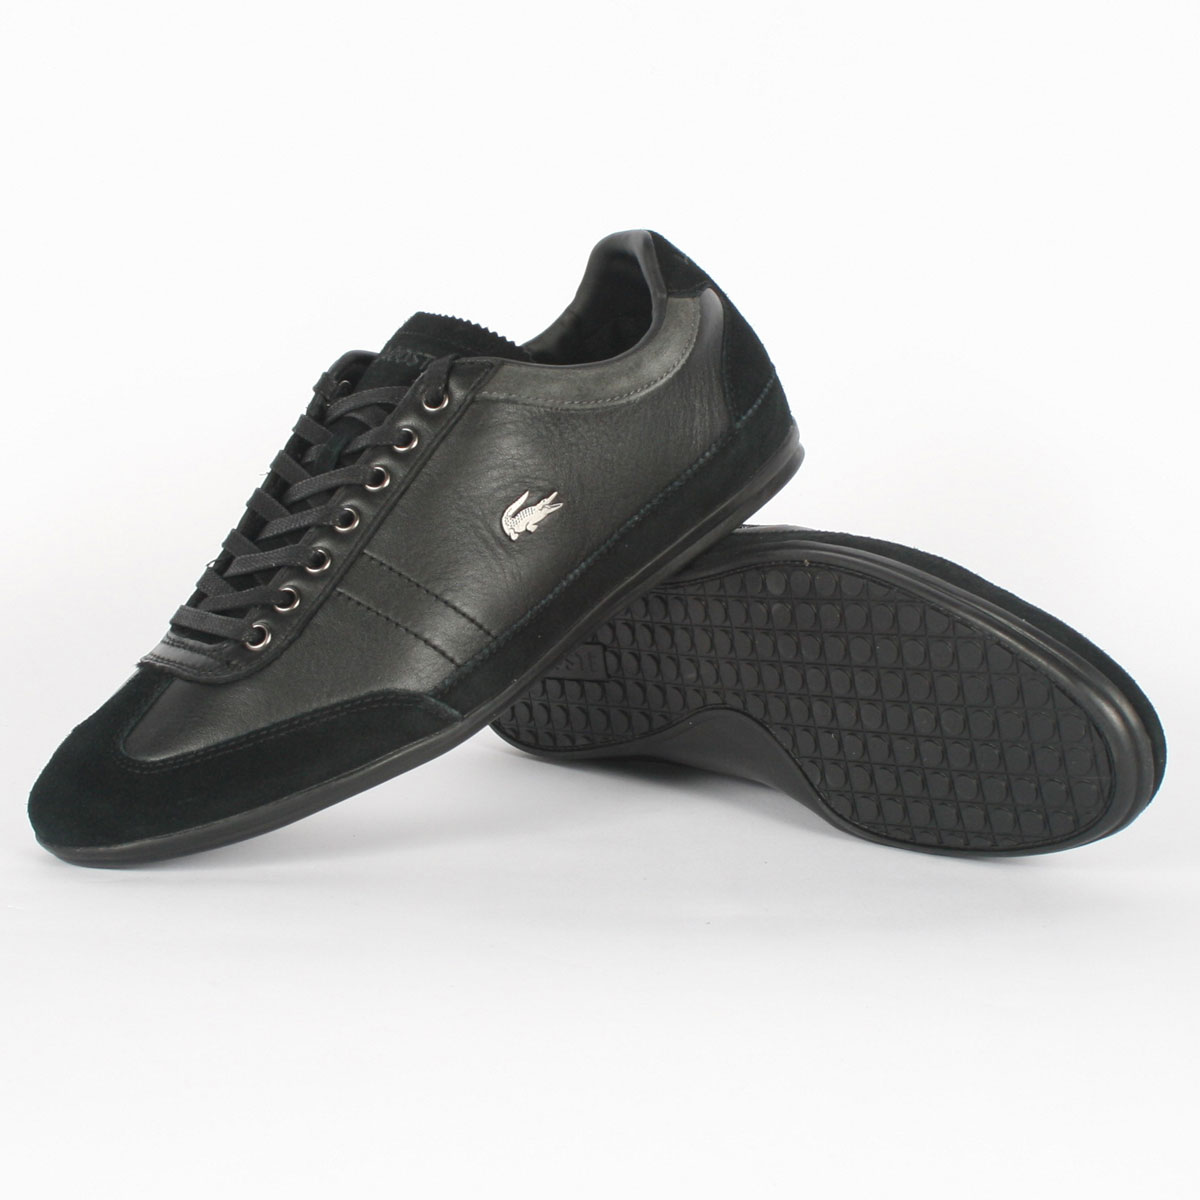 Lacoste - Mens Misano 15 Shoes in Black